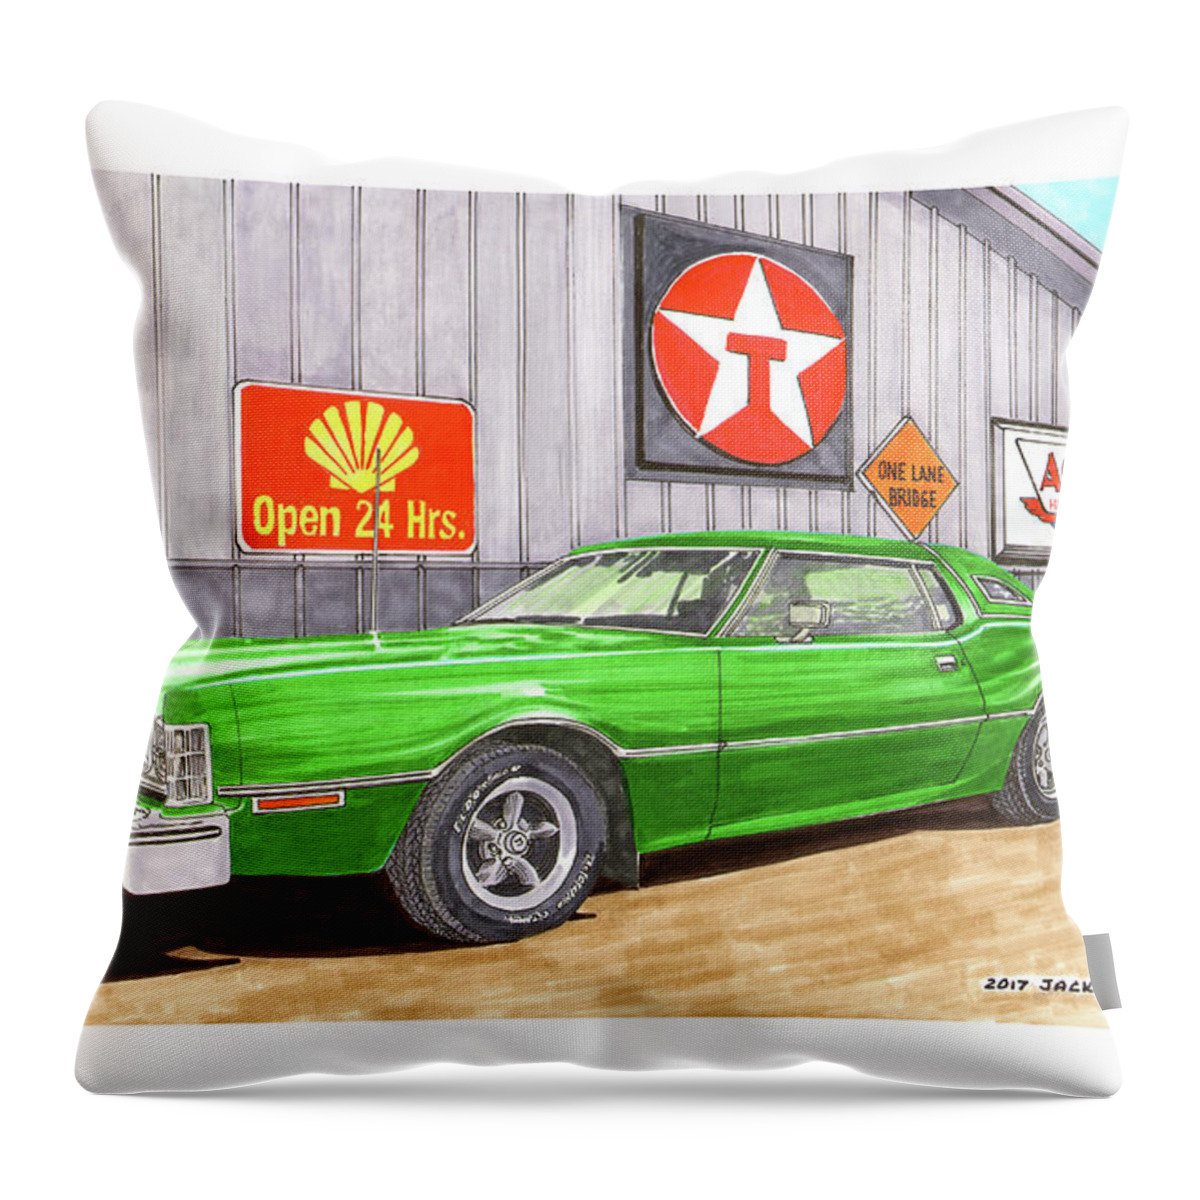 Watercolor Artwork Of The 1976 Ford Thunderbird Which Is A Rear Wheel Drive Automobile Which Was Manufactured By Ford In The United States Over Eleven Model Generations From 1955 Through 2005 Throw Pillow featuring the painting 1976 Ford Thunderbird by Jack Pumphrey